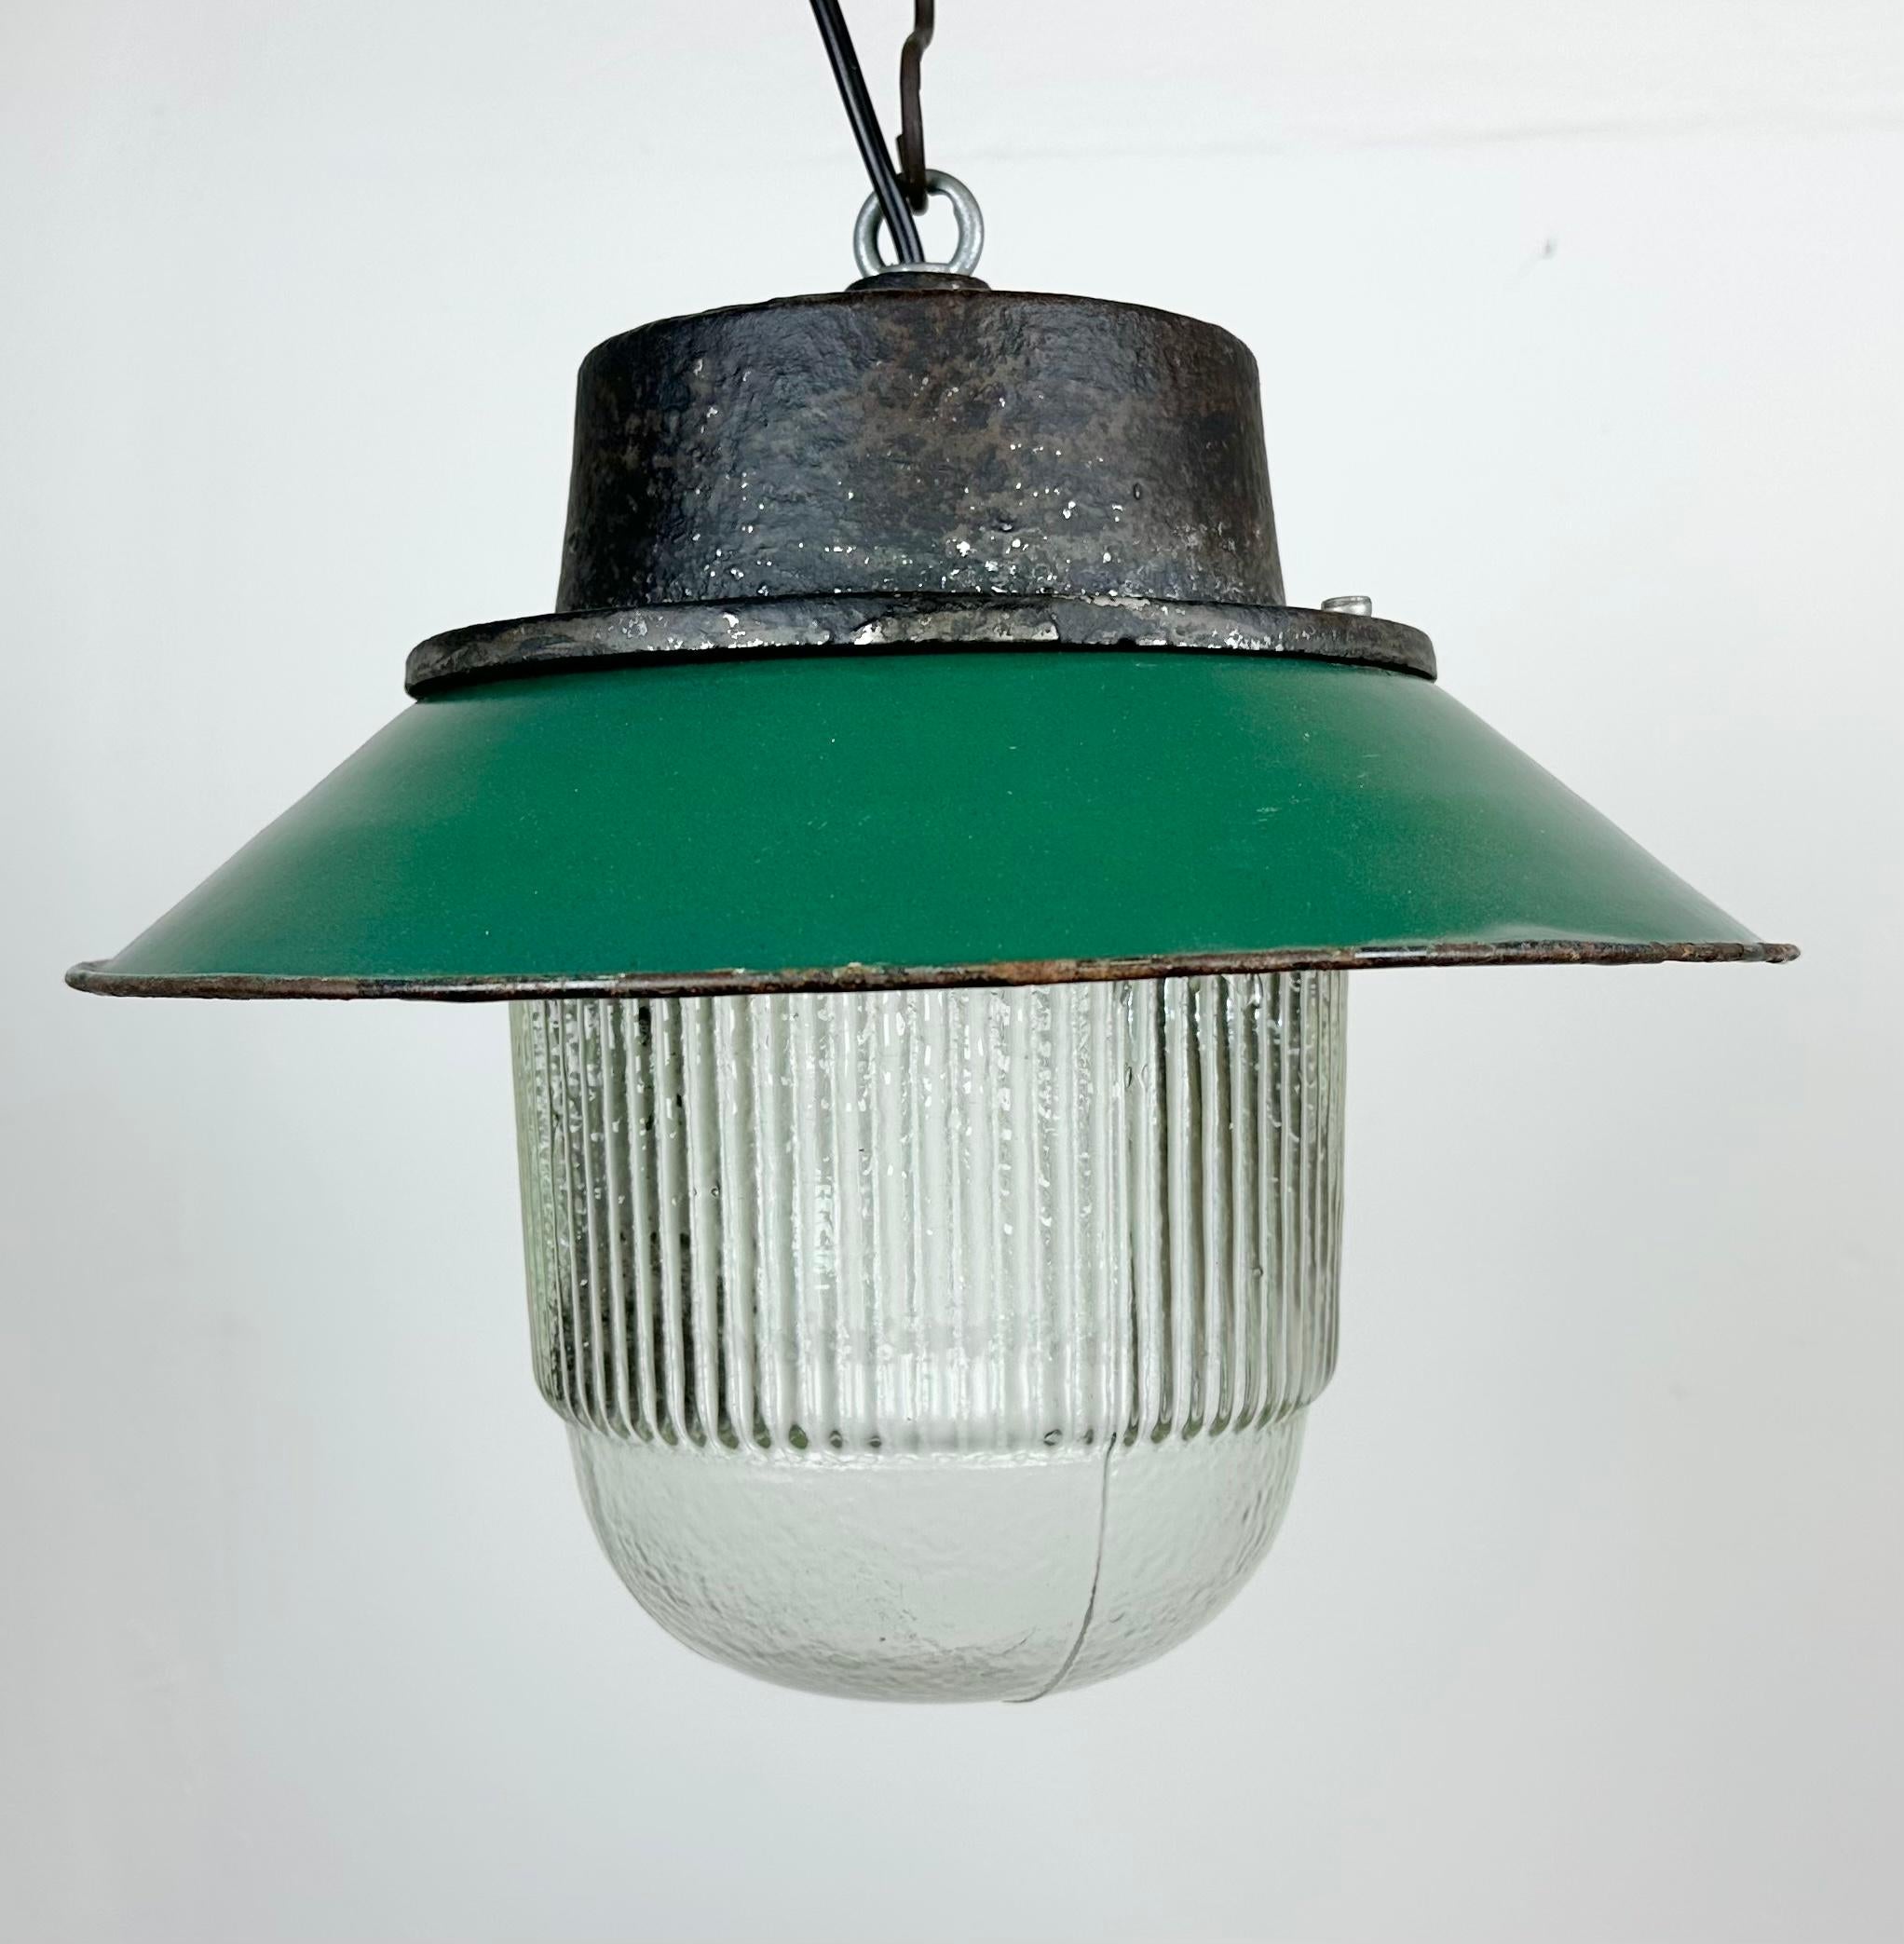 Industrial hanging lamp manufactured in Poland during the 1960s. It features a green enamel shade with a white enamel interior, a grey cast iron top, and a striped glass cover. The porcelain socket requires E 27/ E26 lightbulbs. New wire. The weight